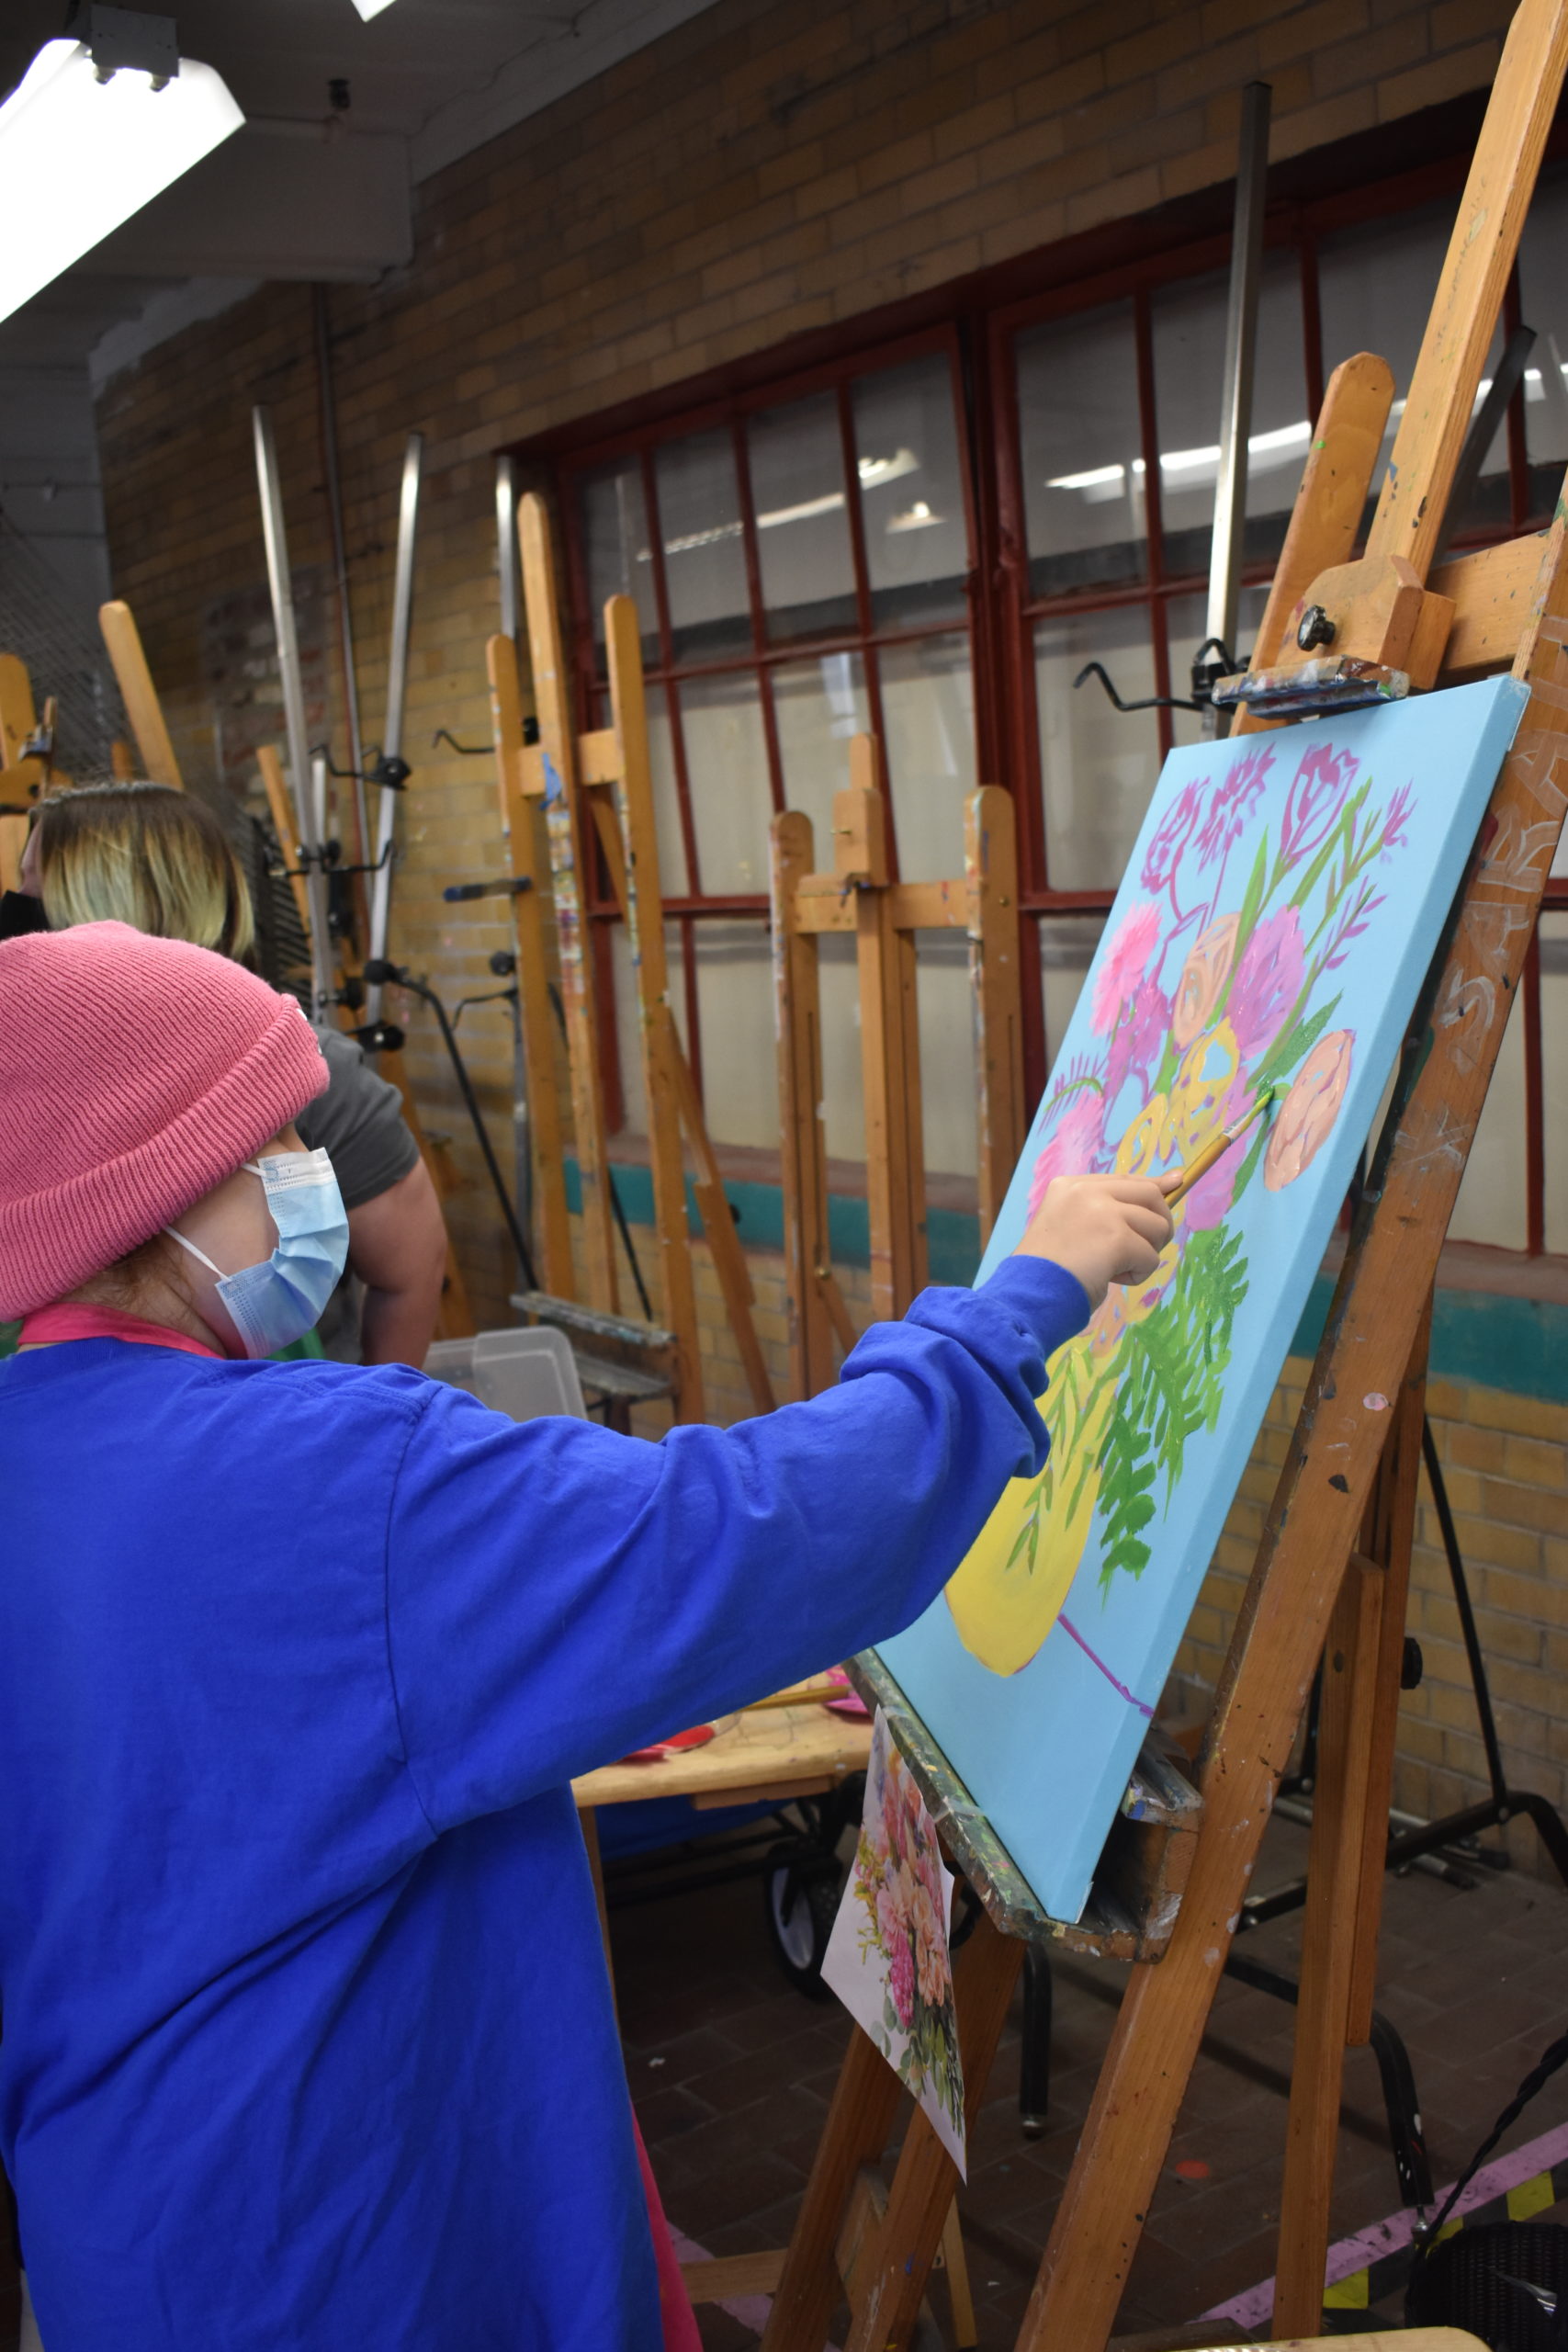 A child wearing a pink hat is painting a picture of a vase with flowers